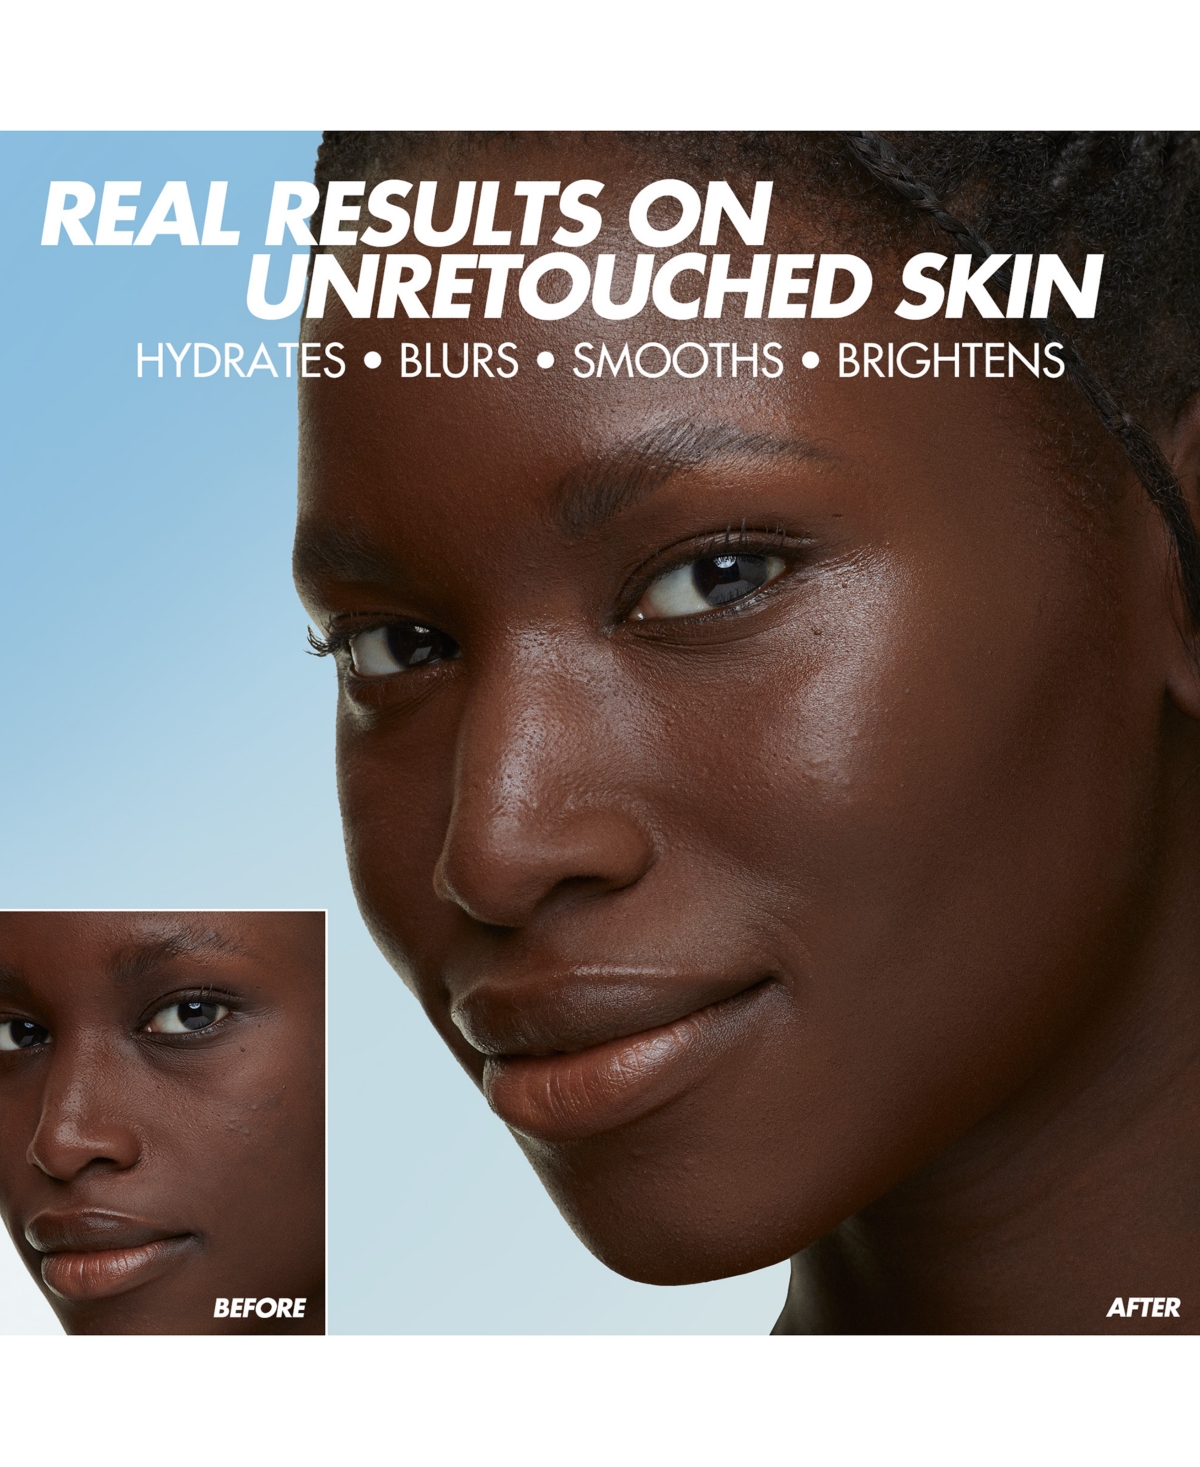 Shop Make Up For Ever Hd Skin Hydra Glow Skincare Foundation With Hyaluronic Acid In R - Cool Alabaster - For Fair Skin With